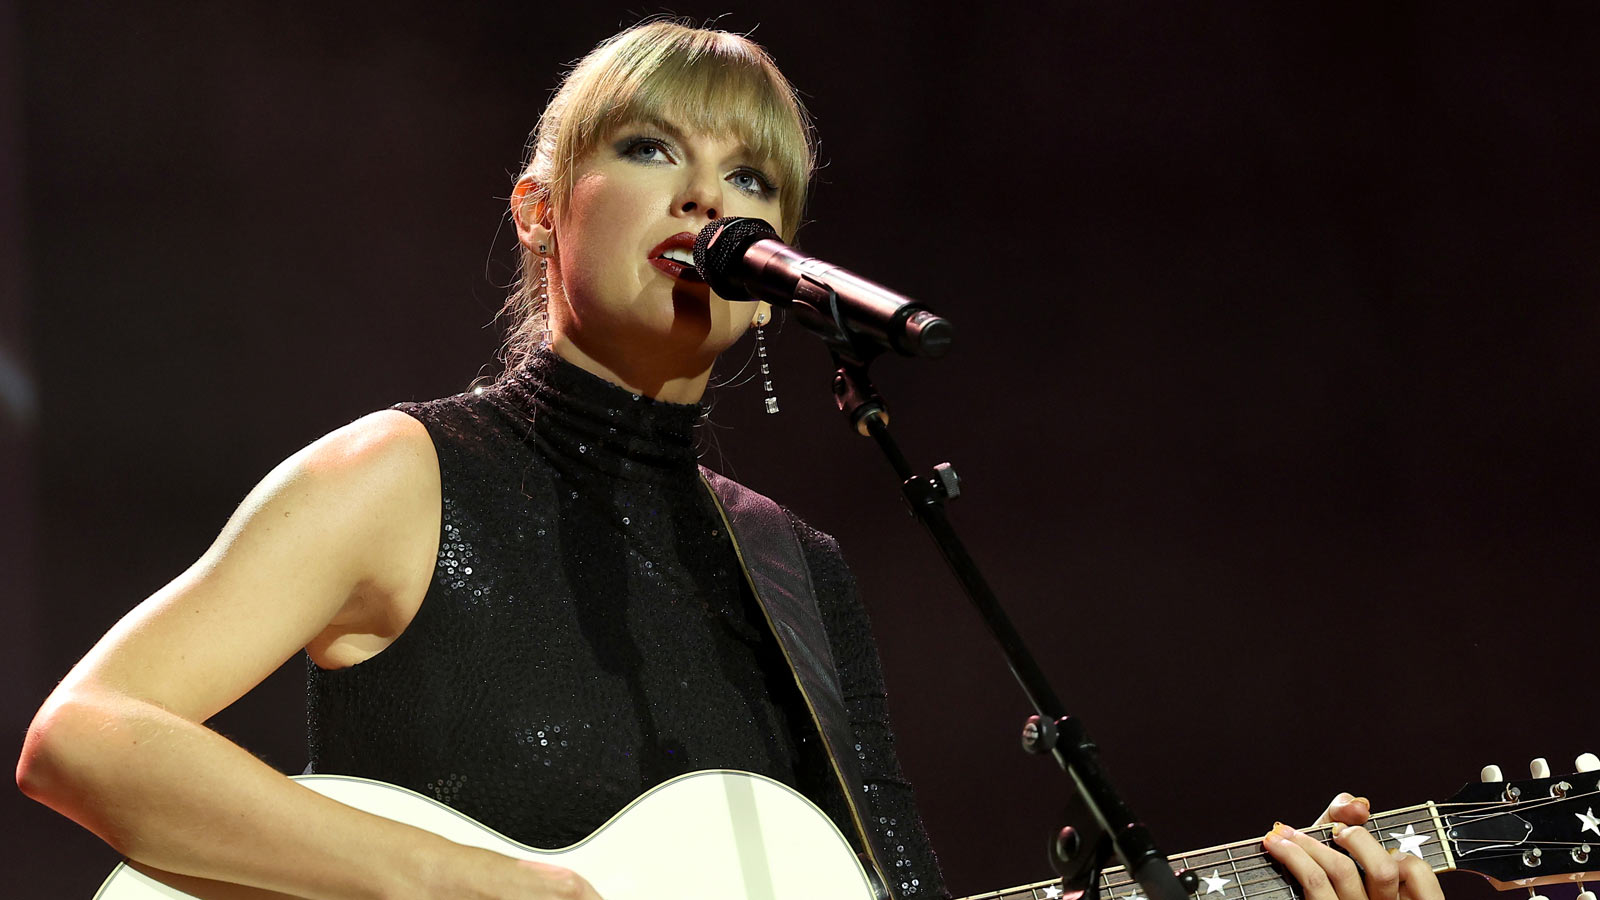 Glendale Swift City to honor Taylor Swift's stadium shows